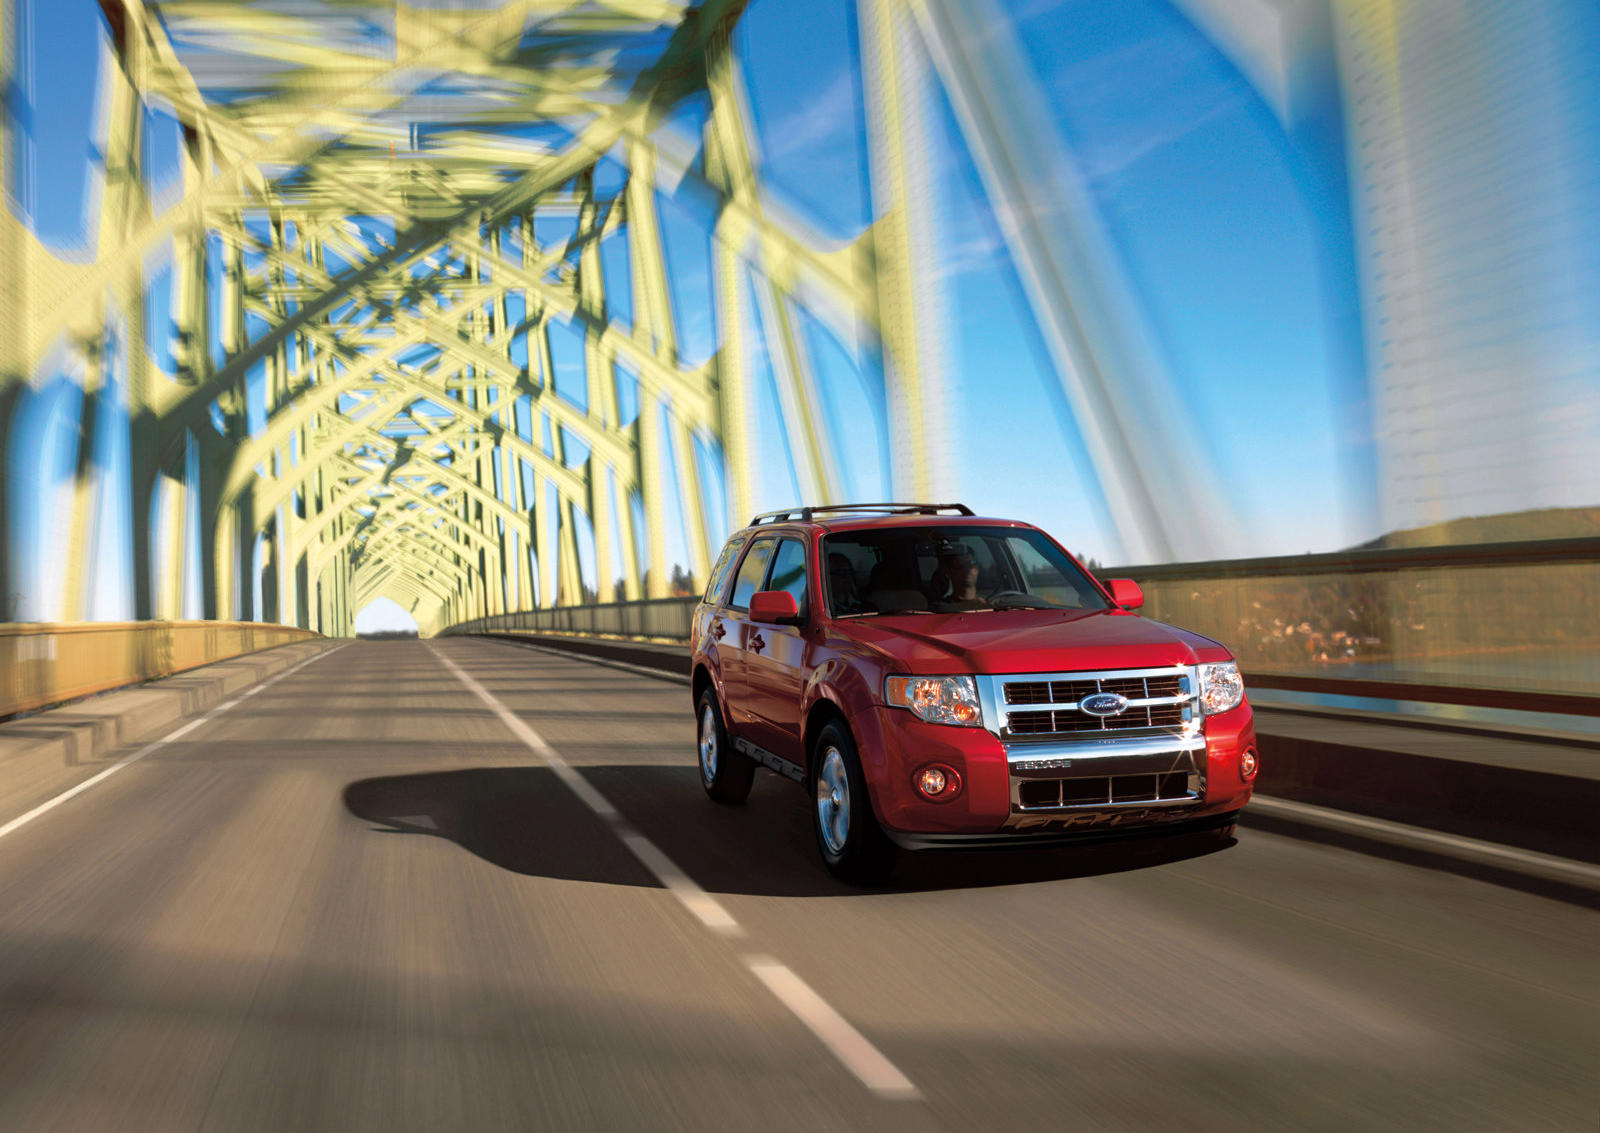 2010 Ford Escape Hybrid Front View Driving